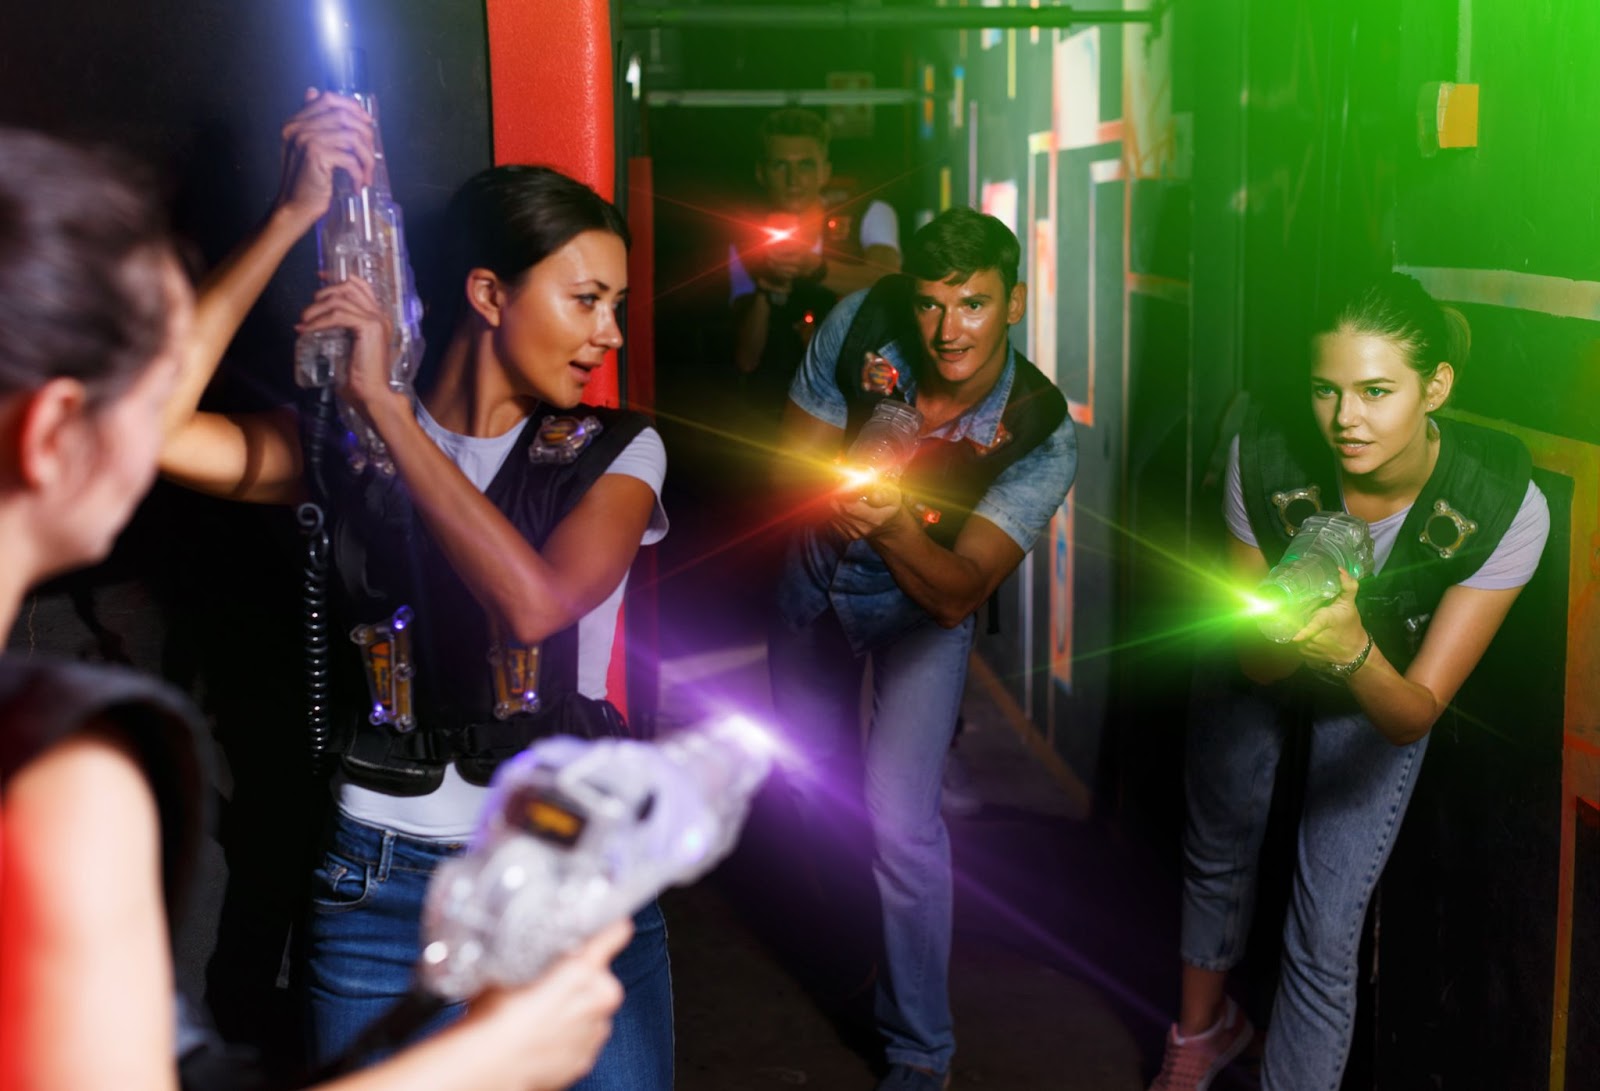 Friends having fun playing with laser tag equipment and guns